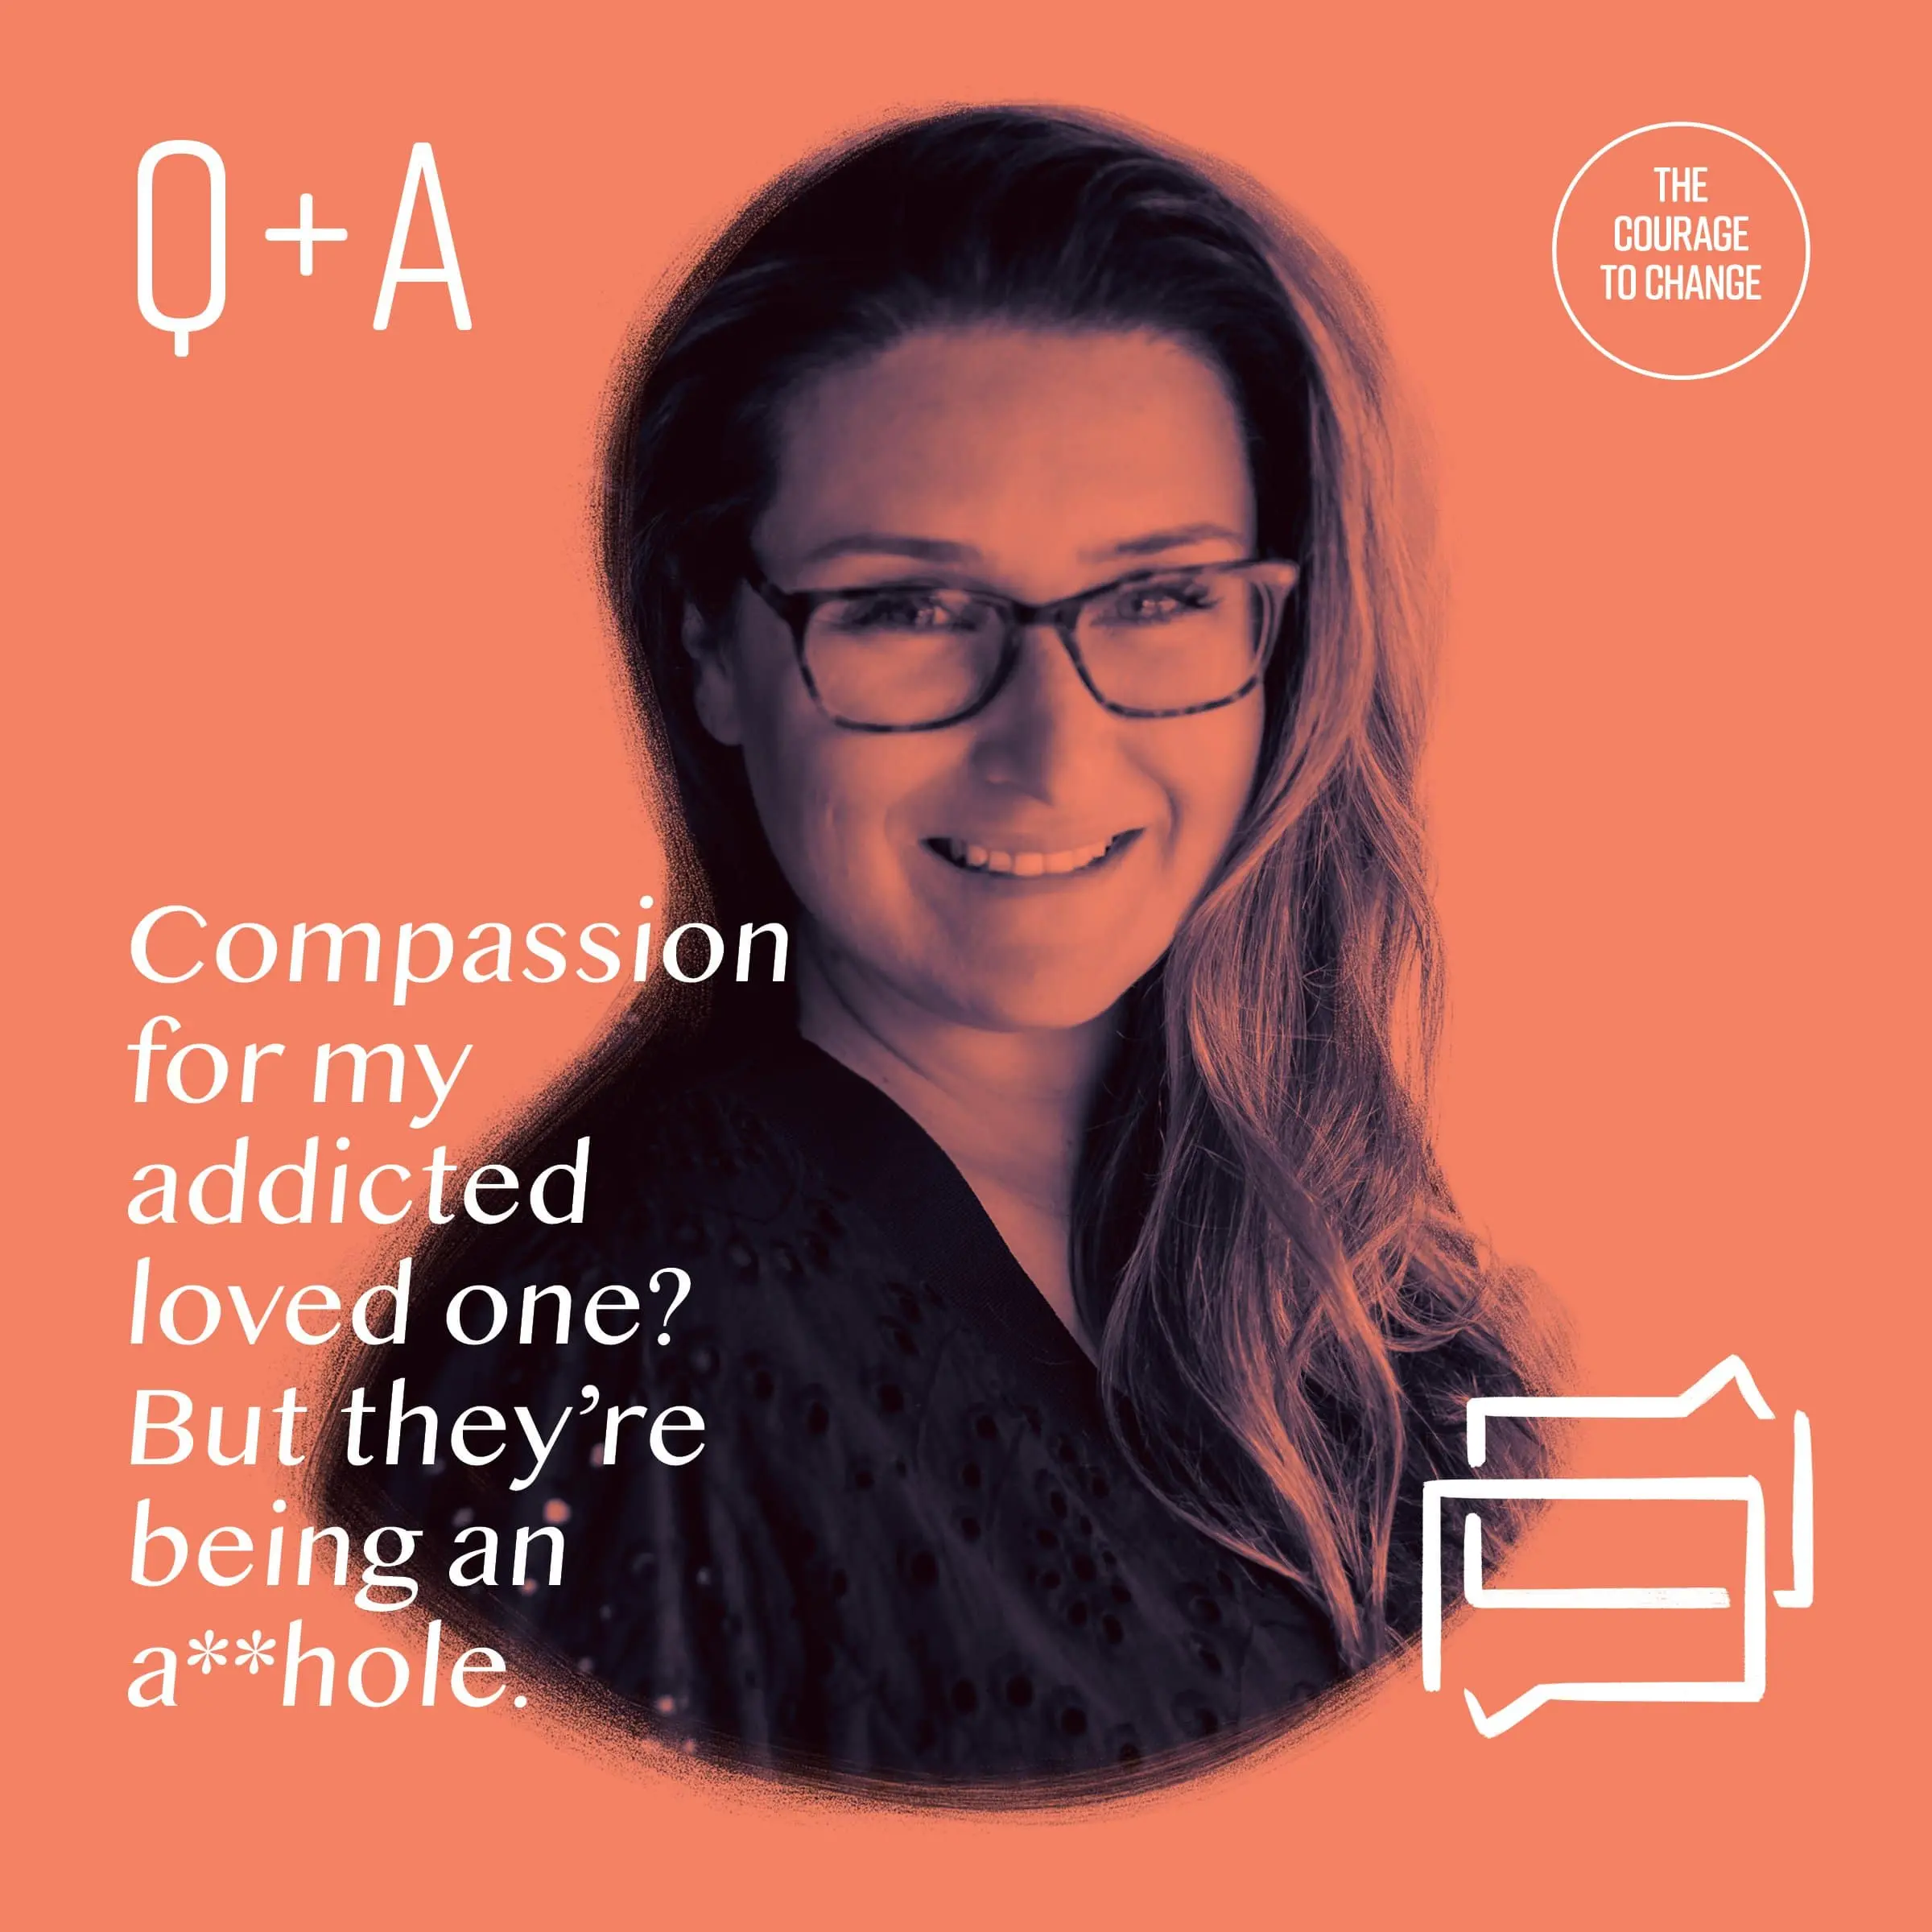 Q+A Compassion For My Addicted Loved One? But They’re Being An A**hole. Ashley Loeb Blassingame has been clean and sober for 16 years, she's a drug and alcohol counselor, interventionist, and the co-founder of a telehealth company called Lionrock Recovery that provides substance use disorder treatment. In this Q and A session she talks with producer Scott Drochelman about the challenges in caring for a loved one who is addicted to something. Folks are asked to lead with empathy, but they also have a right to be angry about the behaviors they're seeing. In this episode we talk about how to hold both ideas in your mind at the same time and tips for anyone caring for someone with an addiction. Additional Resources Episode Resources Connect with Ashley Loeb Blassingame TikTok | @ashleyloebblassingame Connect with The Courage to Change Podcast Website | lionrock.life/couragetochangepodcast Podcast Instagram | @couragetochange_podcast Podcast Facebook | @thecouragetochangepodcast Podcast Email | podcast@lionrock.life YouTube | The Courage to Change Playlist Lionrock Resources Lionrock Life Mobile App | lionrock.life/mobile-app Support Group Meeting Schedule | lionrock.life/meetings